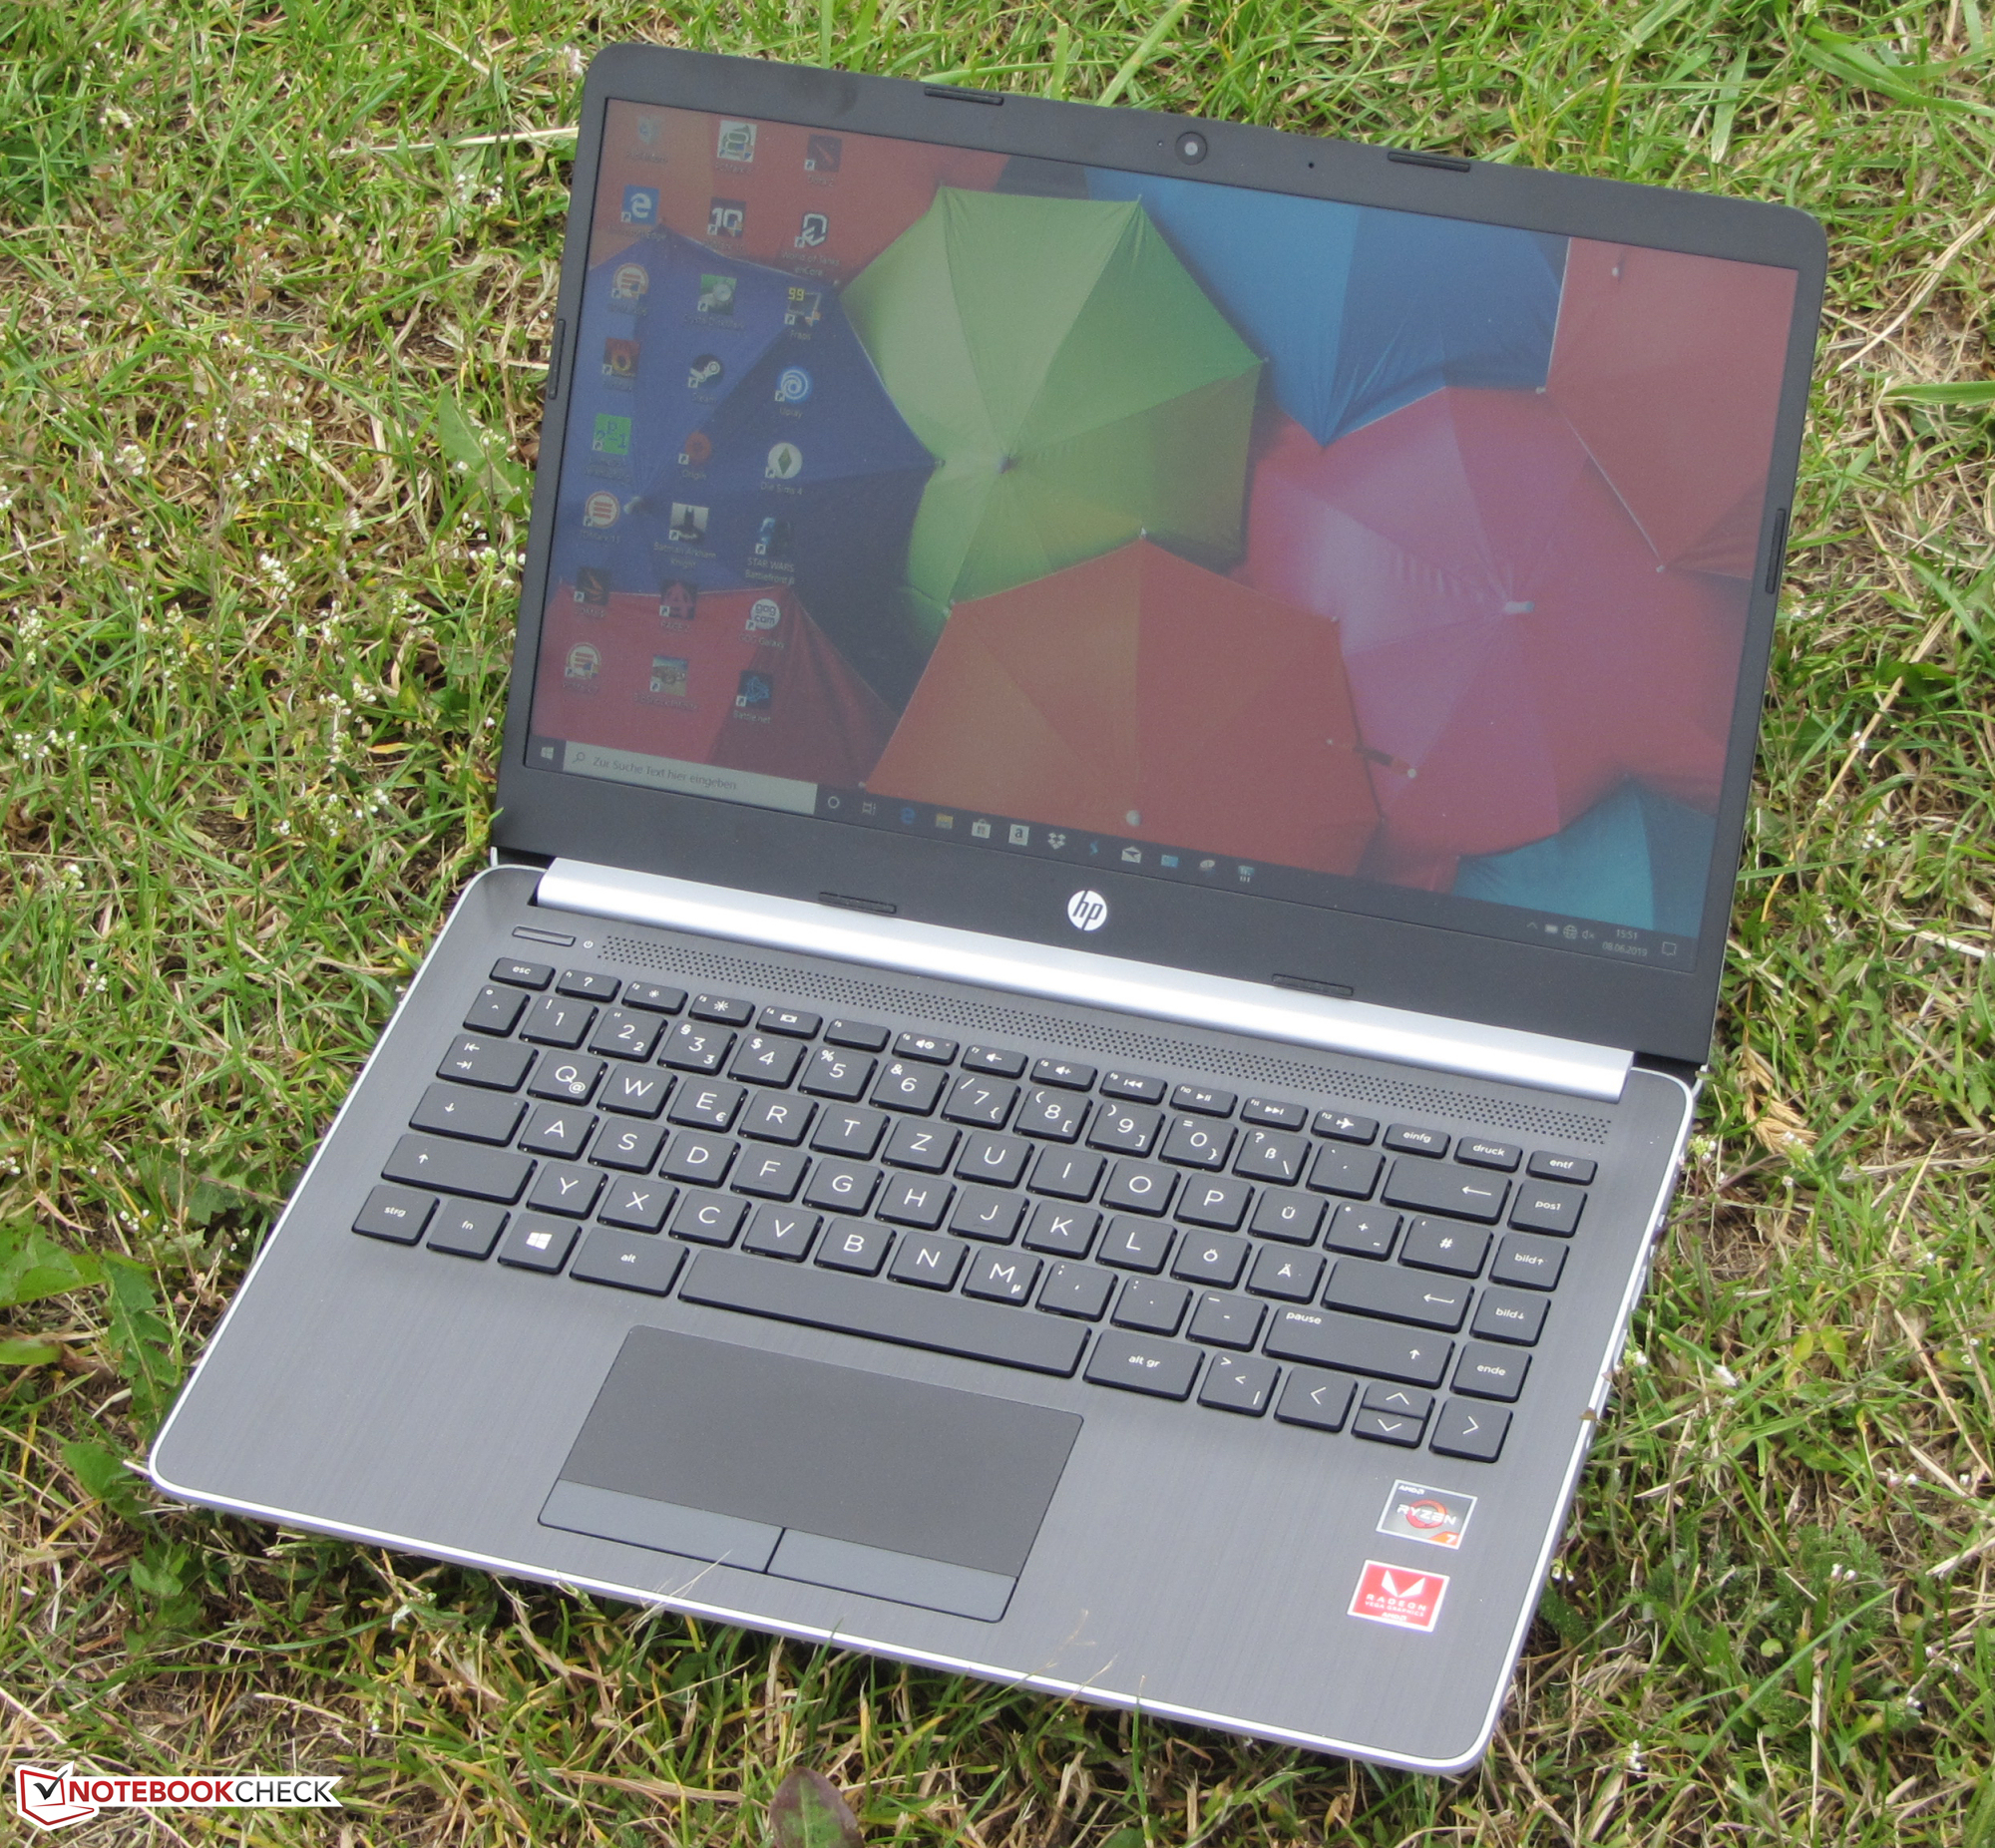 Review of the HP 14: Ryzen 7 3700U-based Laptop with an